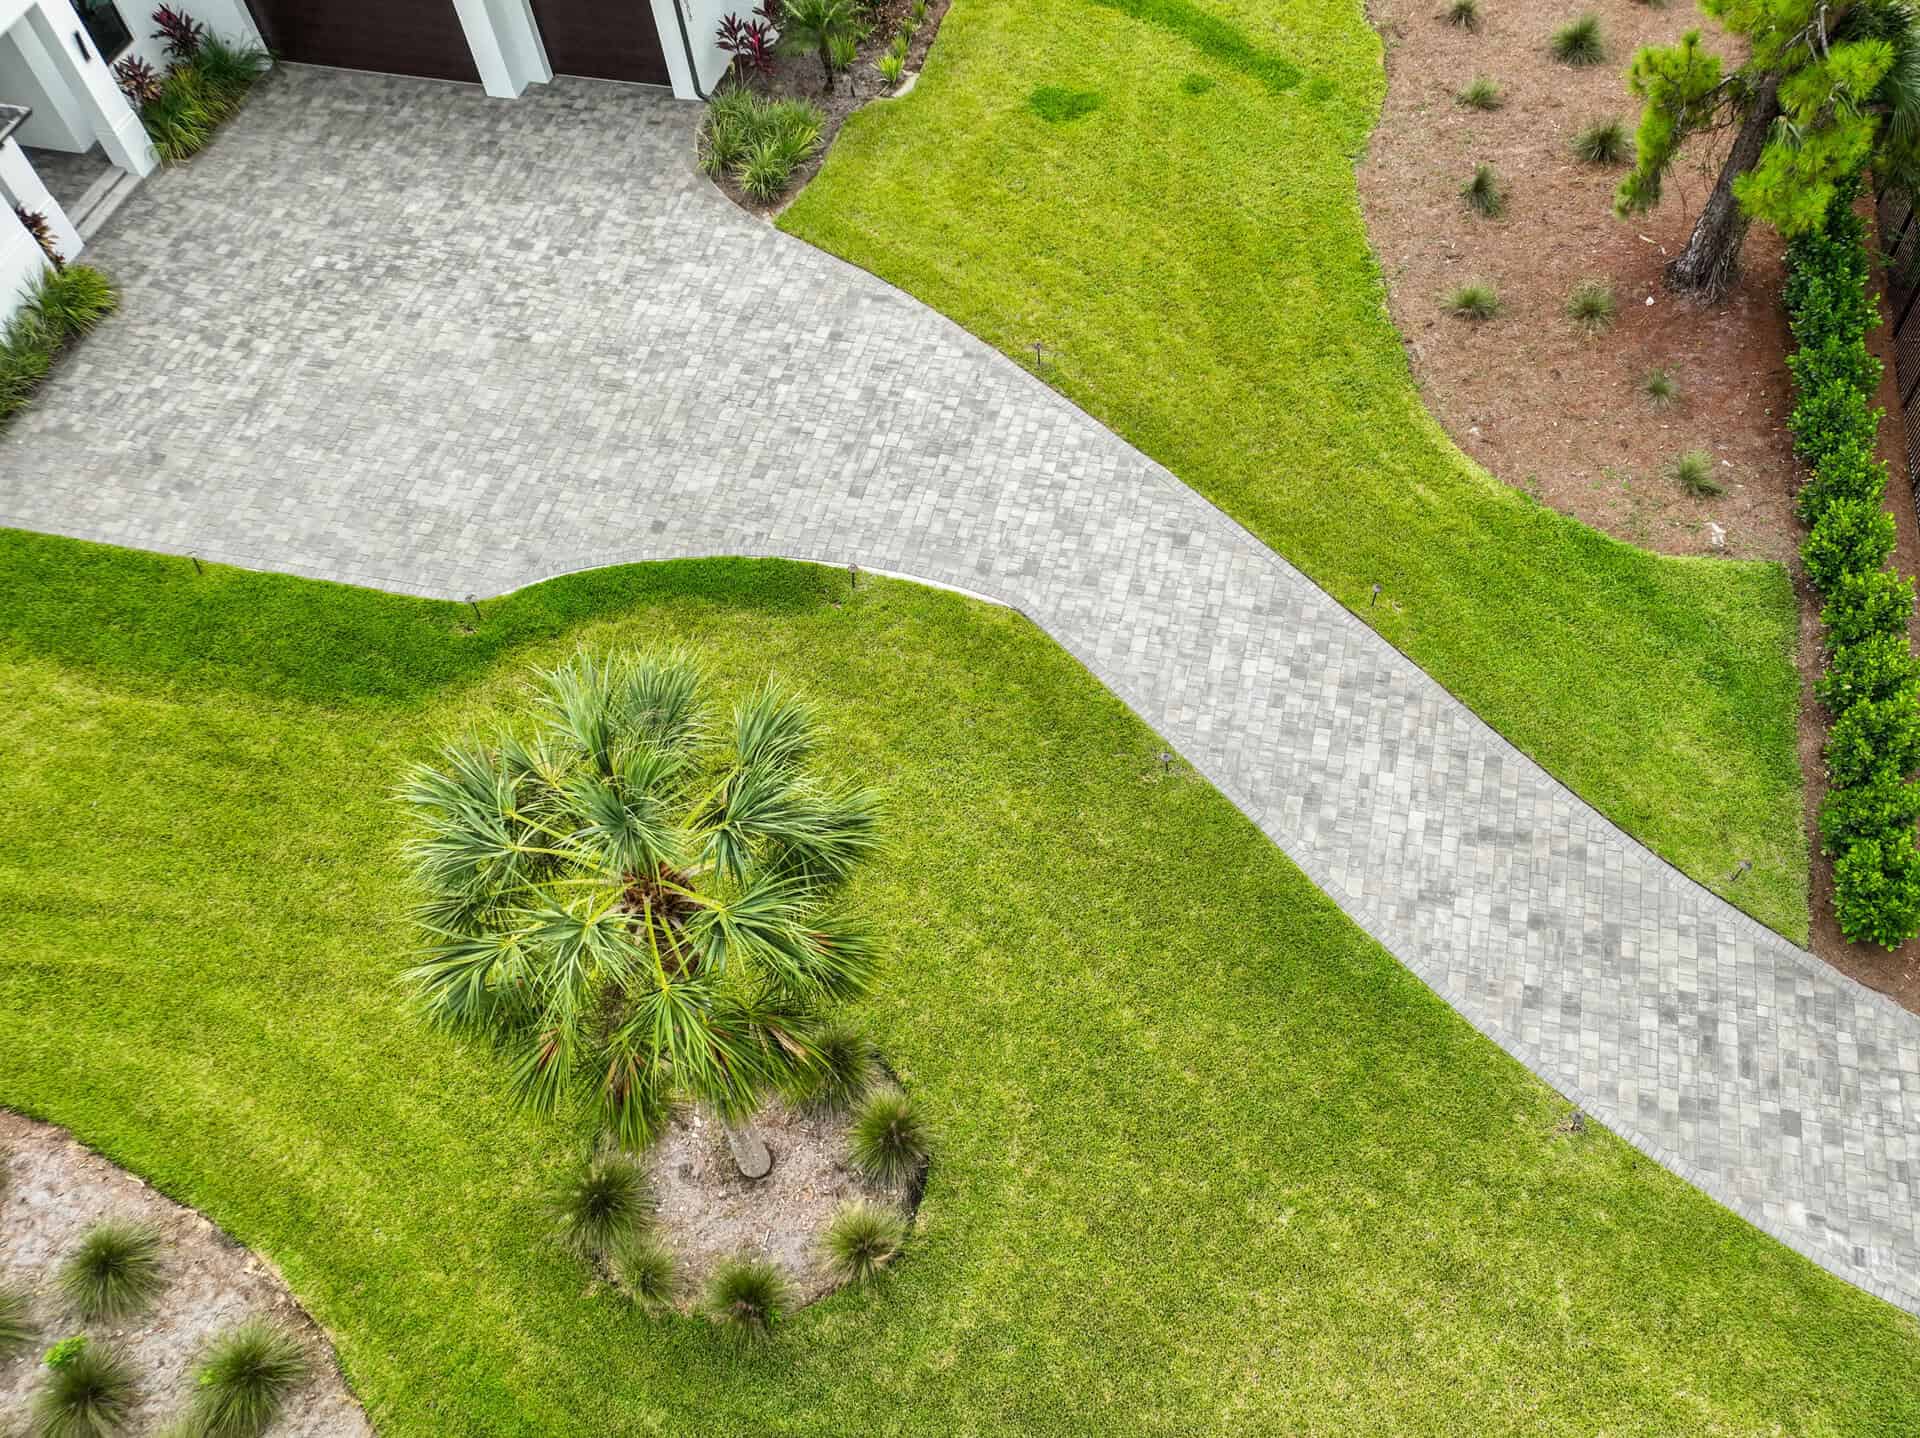 arial photograph of a driveway paved by accurate pavers